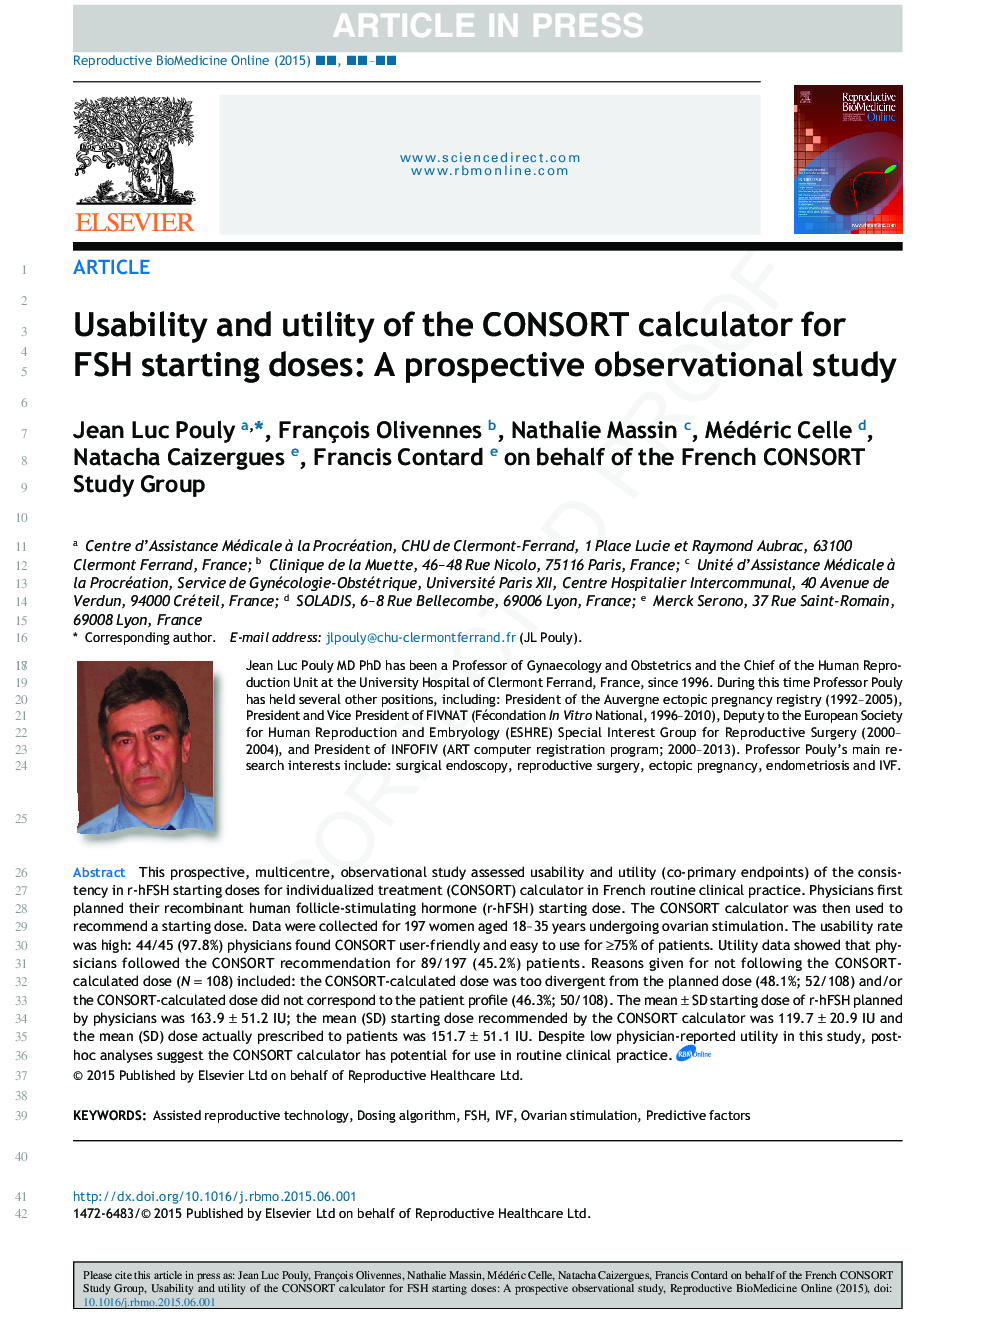 Usability and utility of the CONSORT calculator for FSH starting doses: a prospective observational study